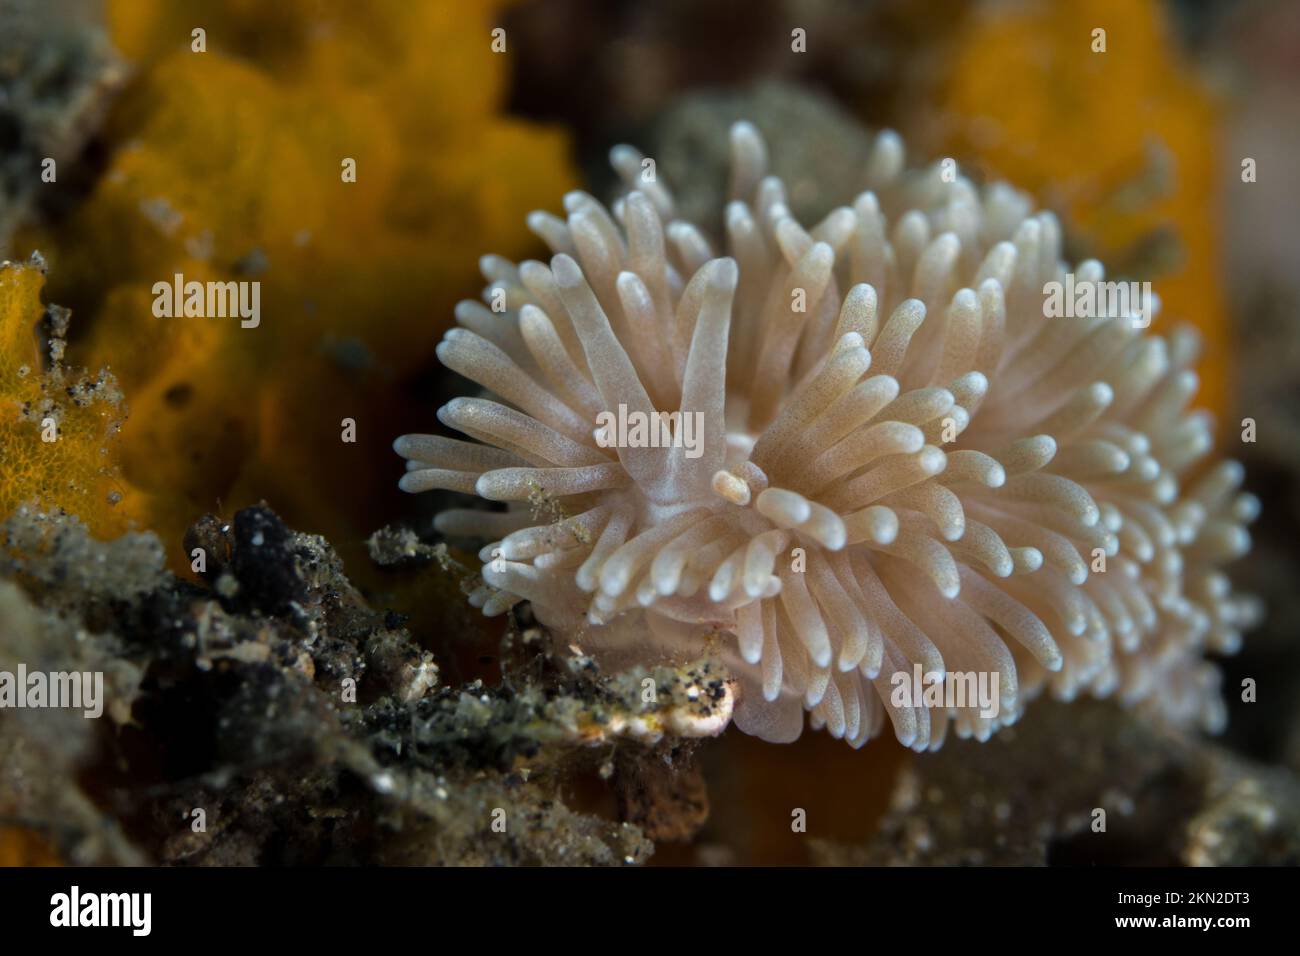 Cryptic nudibranch sea slug camouflages in with its surroundings on coral reef Stock Photo